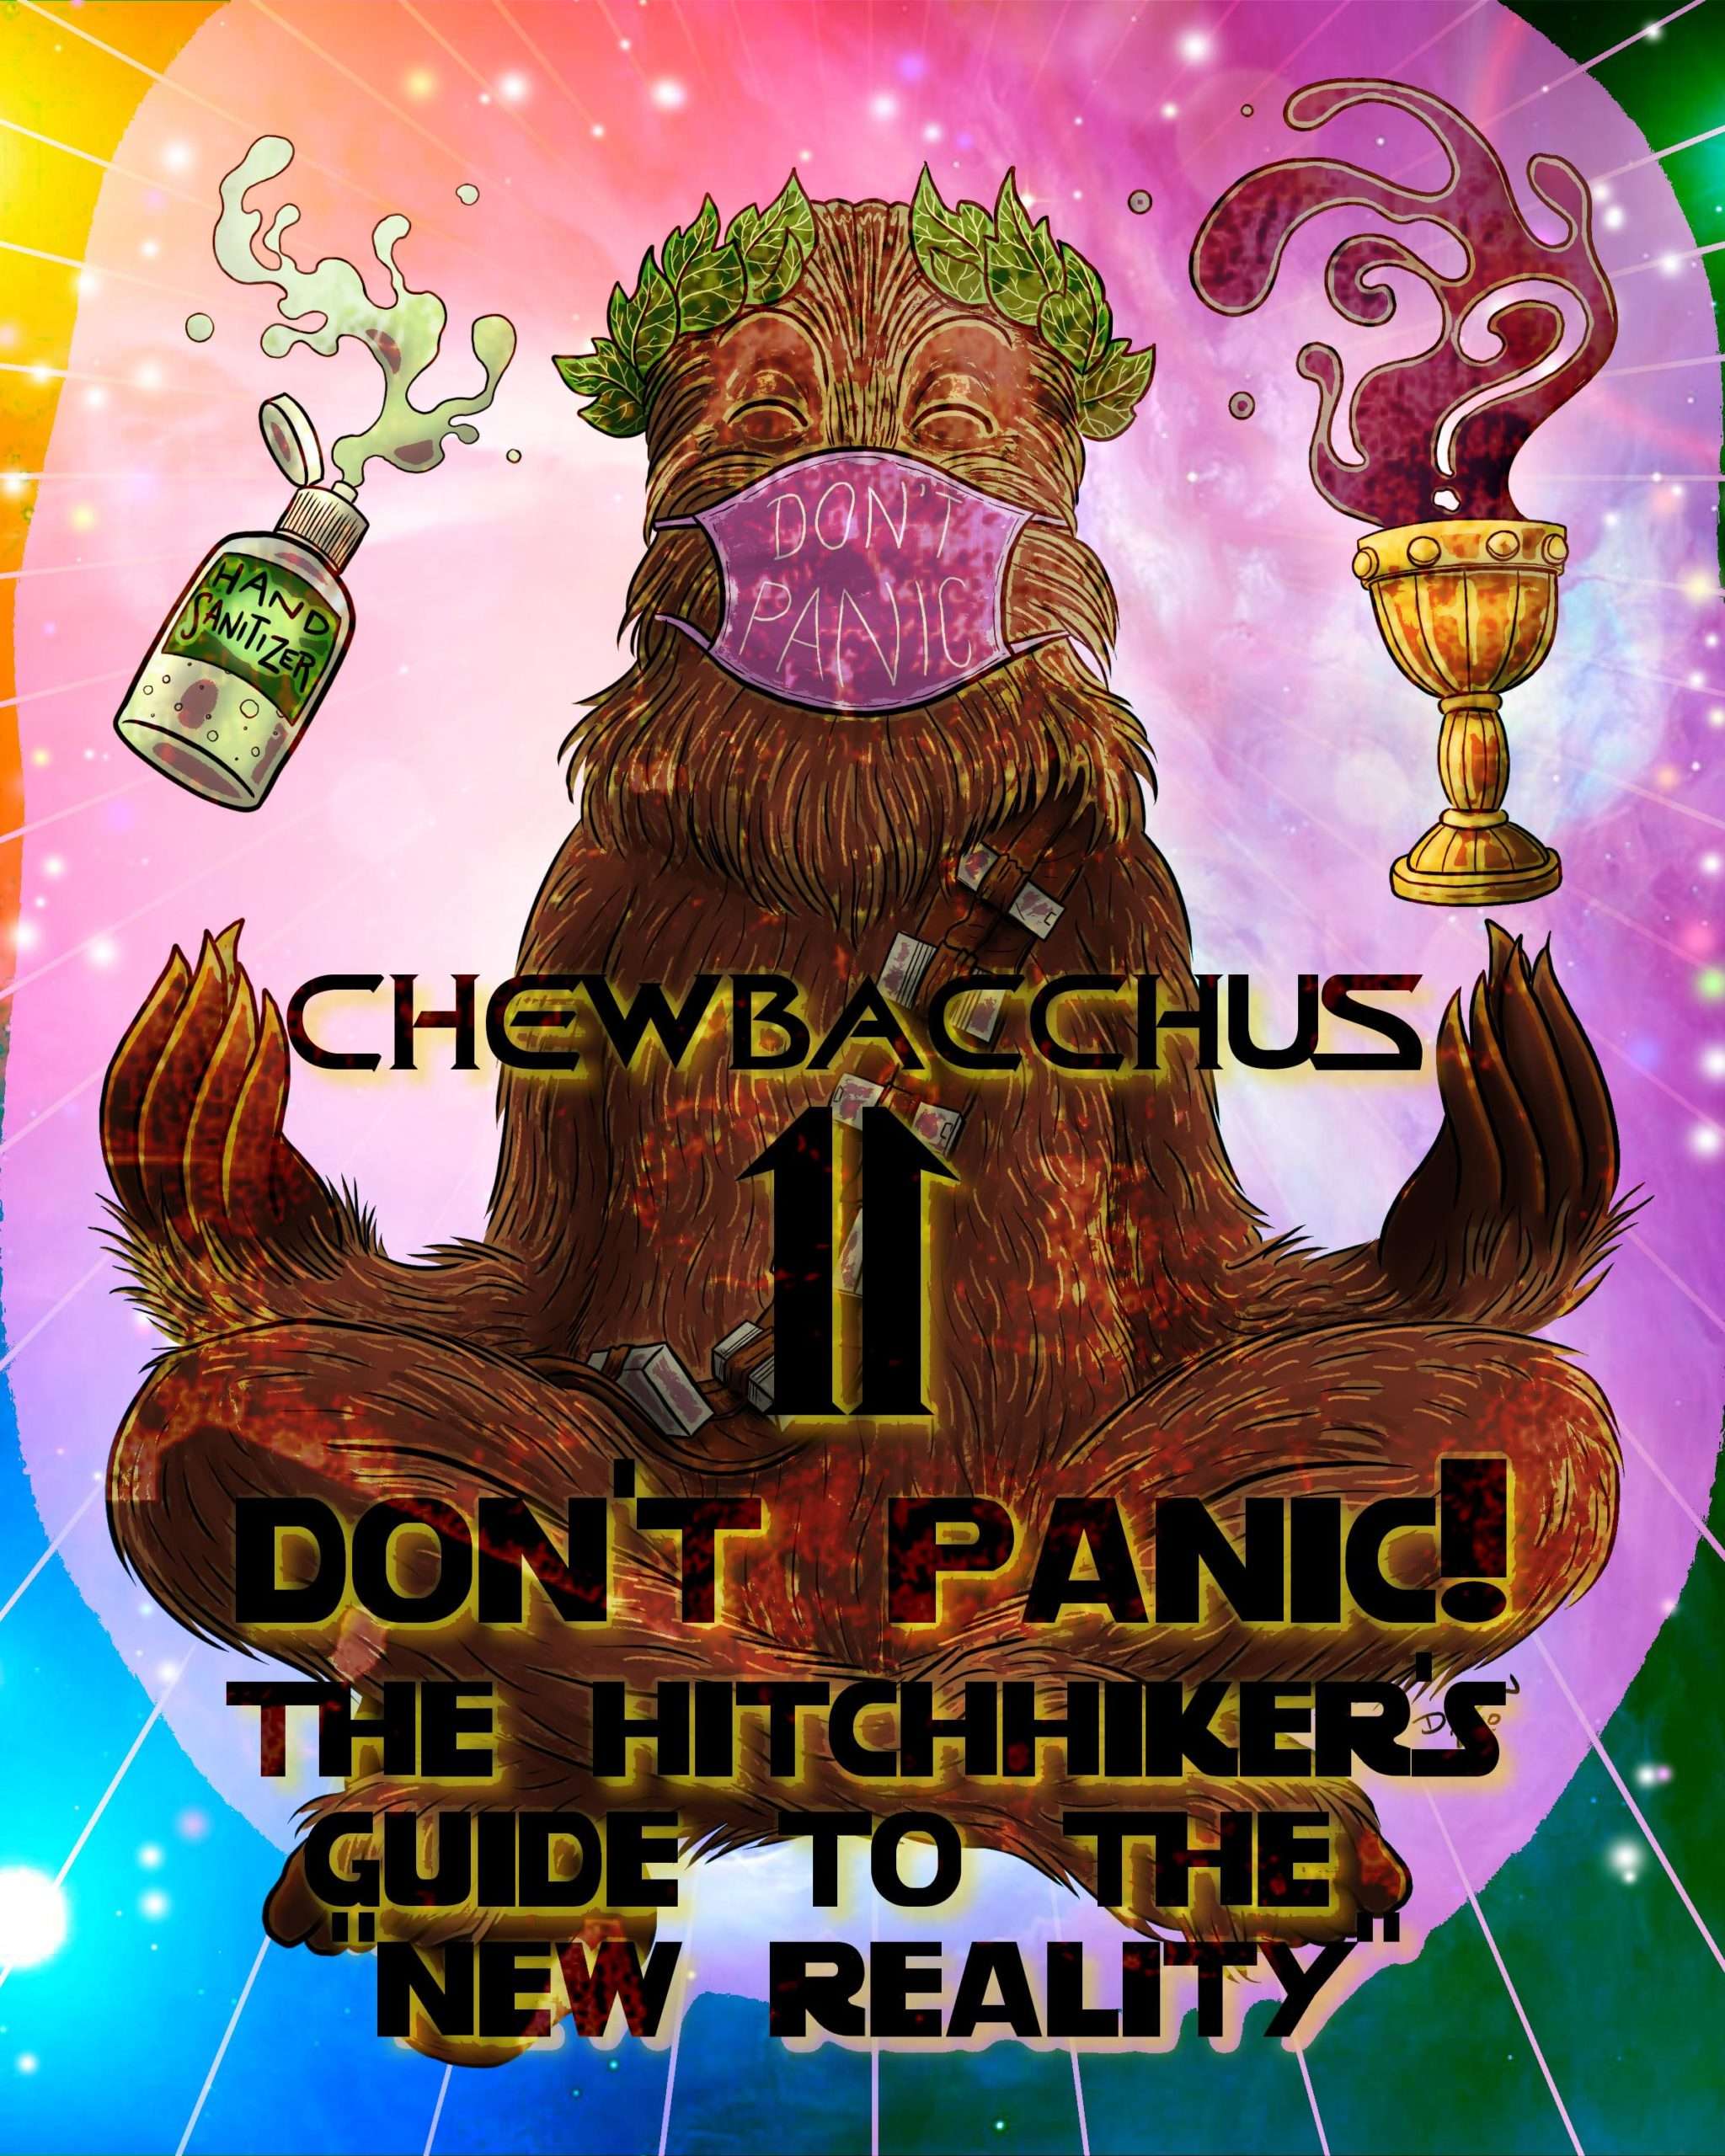 Chewbacchus 2021: Don’t Panic! The Hitchhikers’s guide to the “new Reality”